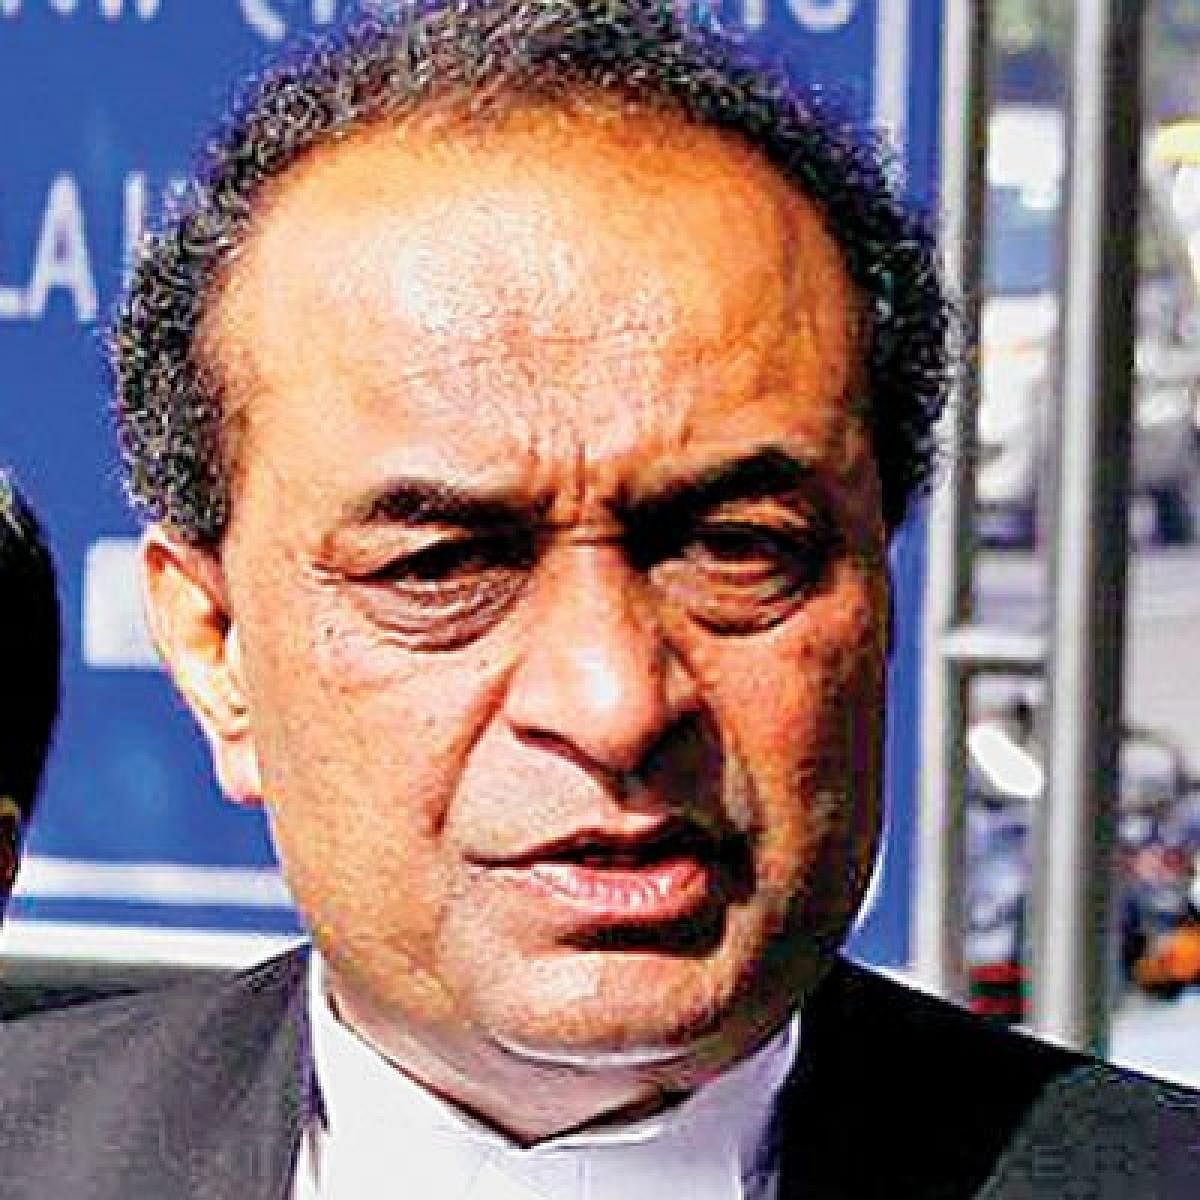 Go ahead with law on quota in promotion: Rohatgi